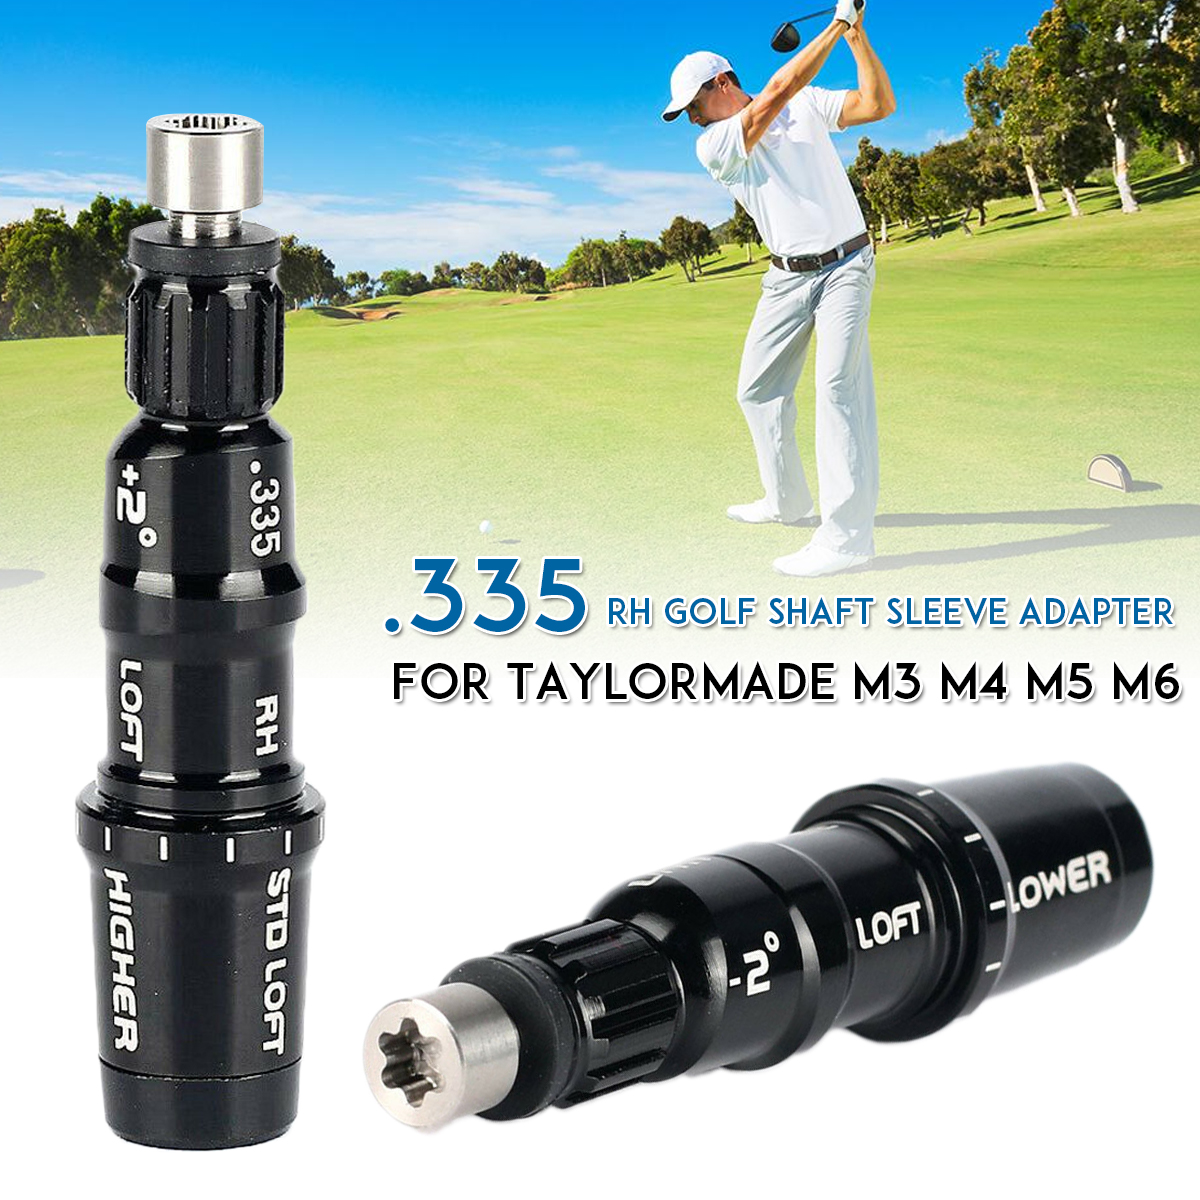 0335-Golf-Shaft-Adapter-Sleeve-Driver-Fairway-RH-For-Taylor-Made-M3-M4-M5-M6-1542827-1